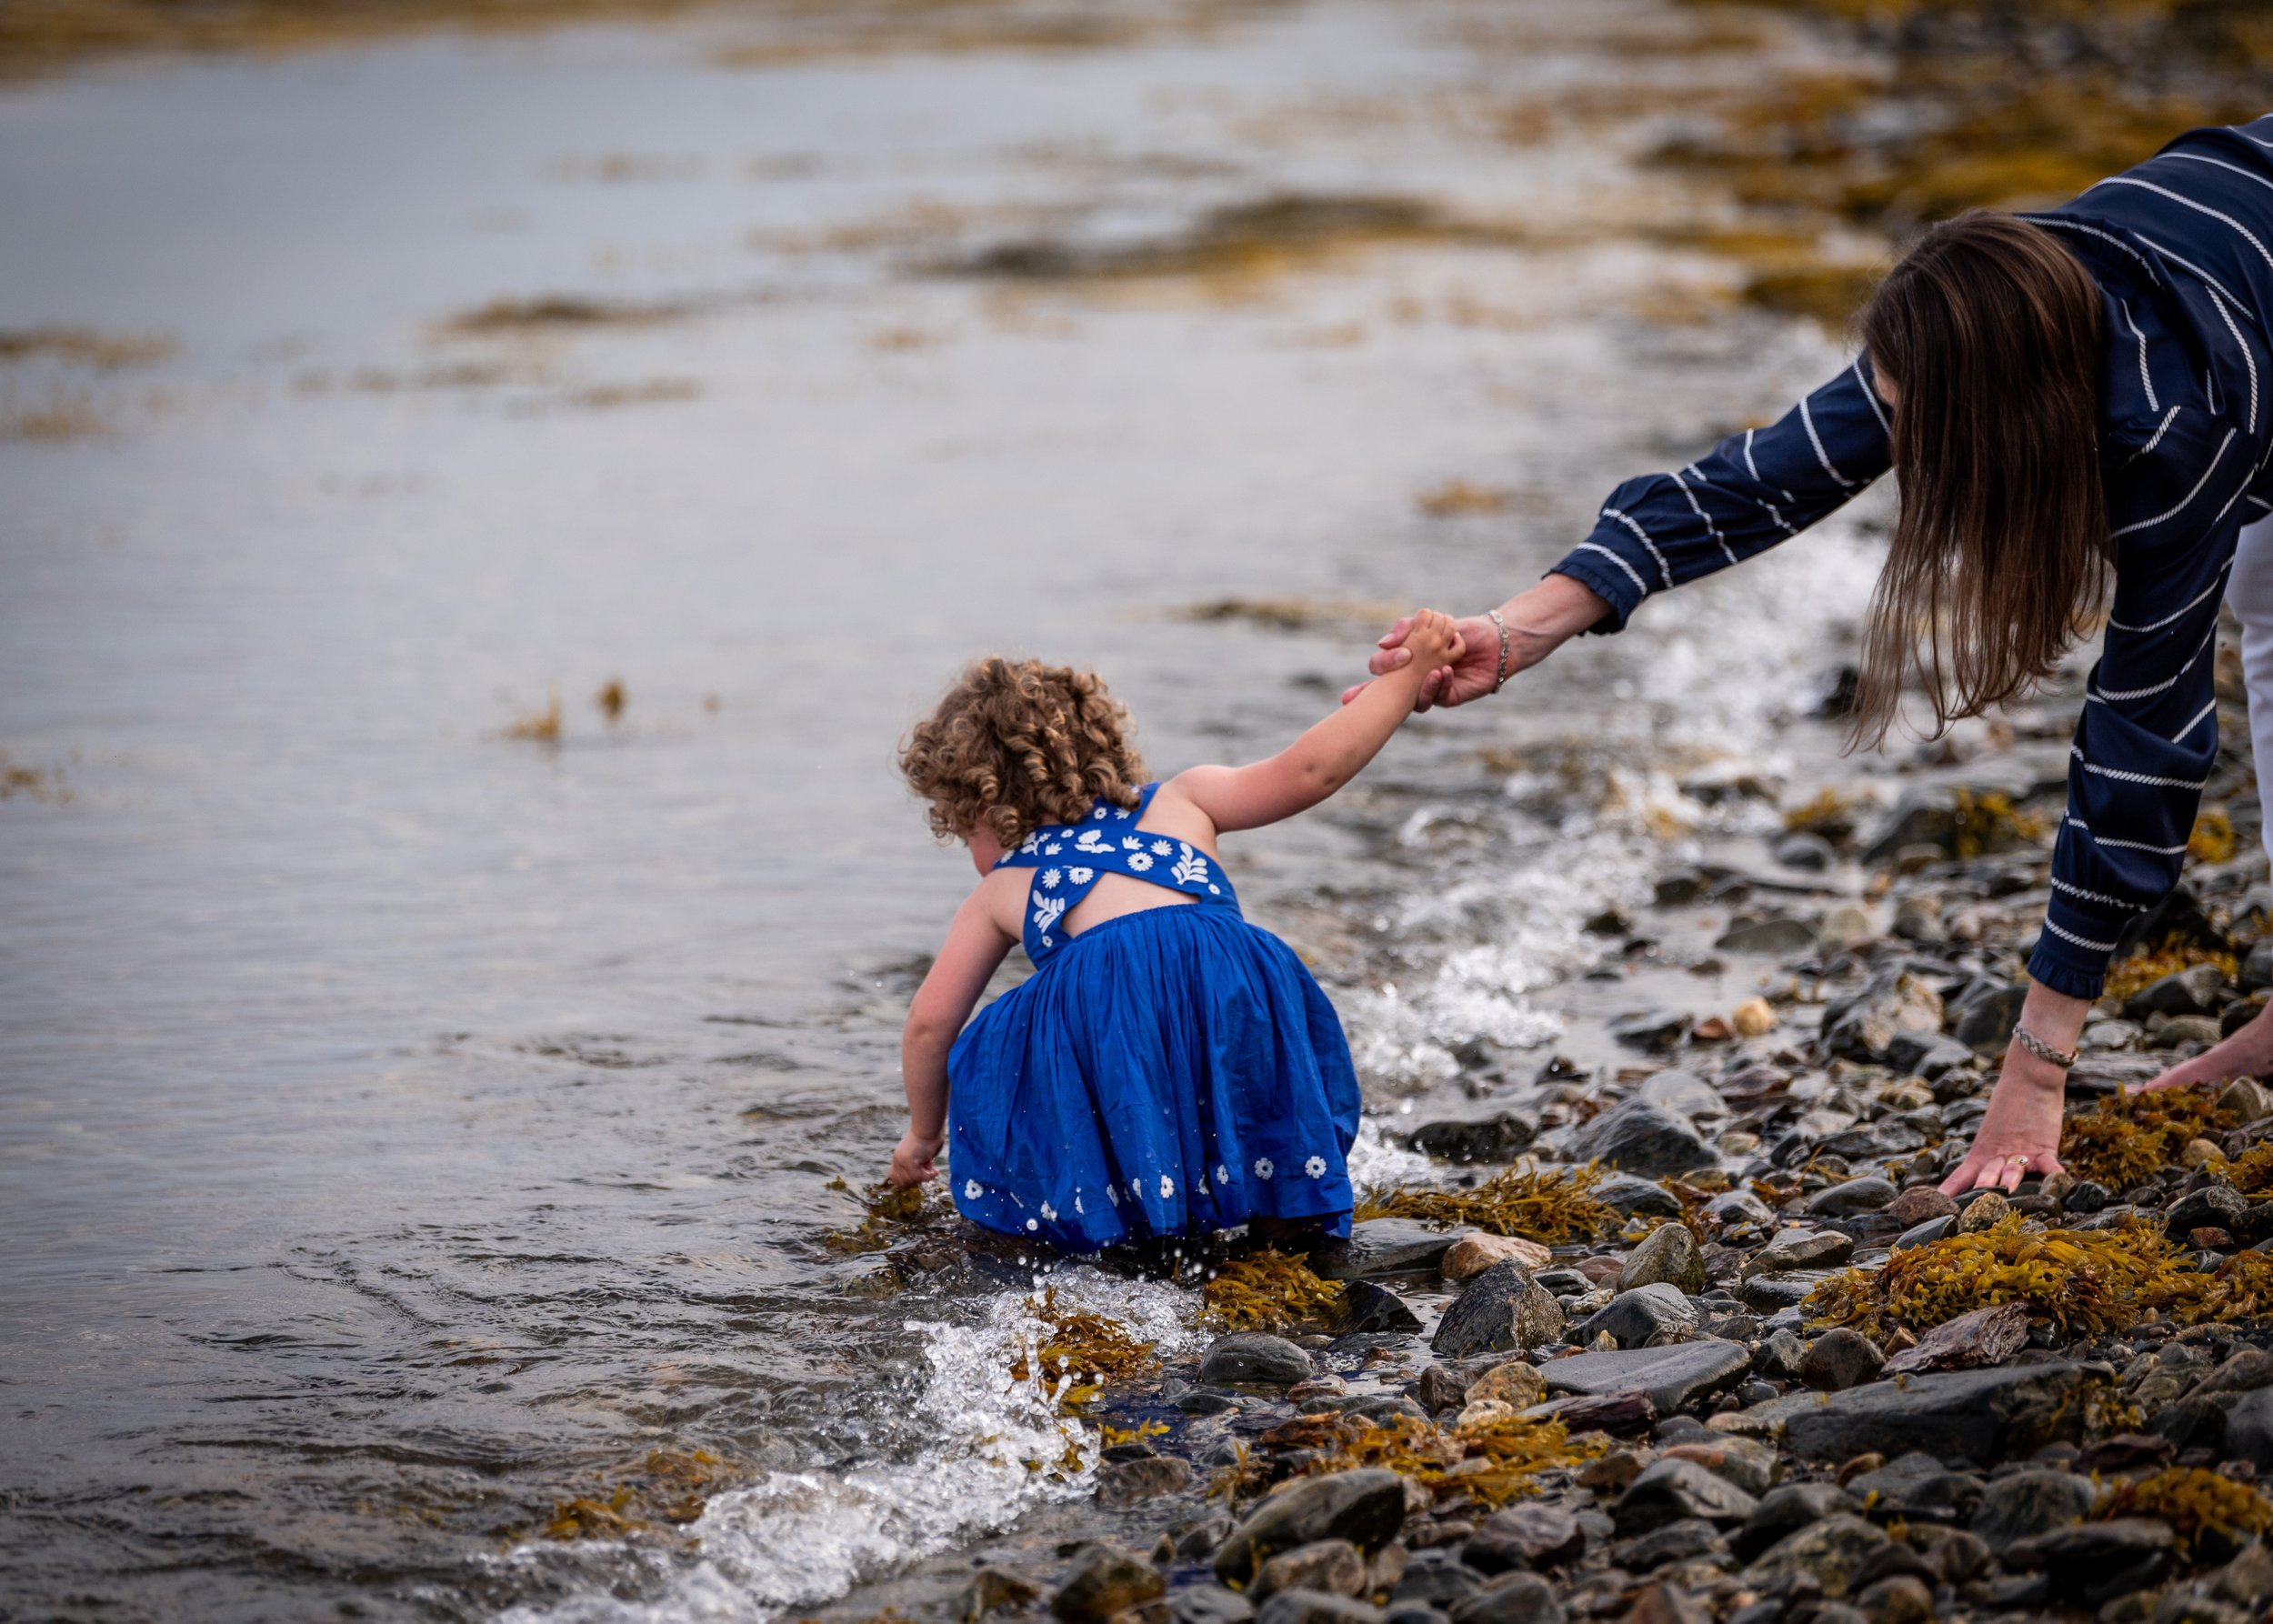 lindsay murphy photography | portland maine family photographer | Chebeague Island little girl in water with dress.jpg